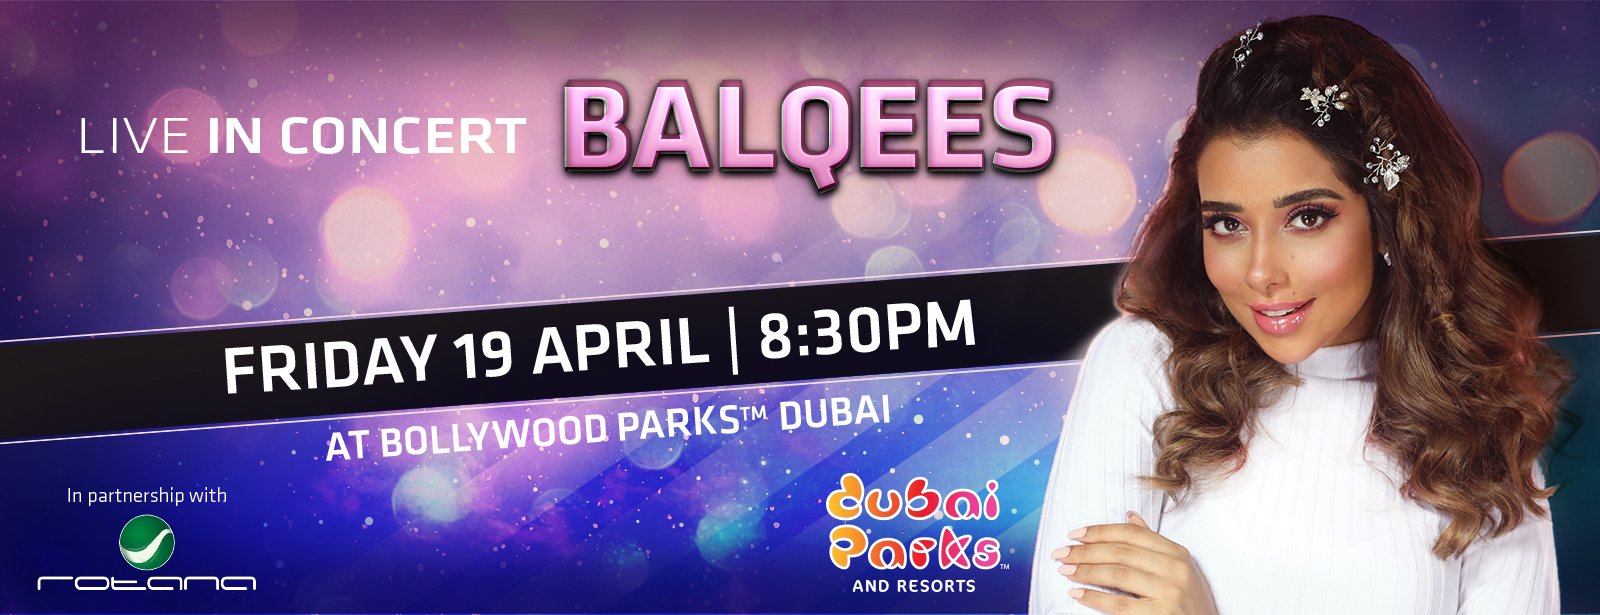 Balqees Fathi Concert at Bollywood Parks Dubai - Coming Soon in UAE